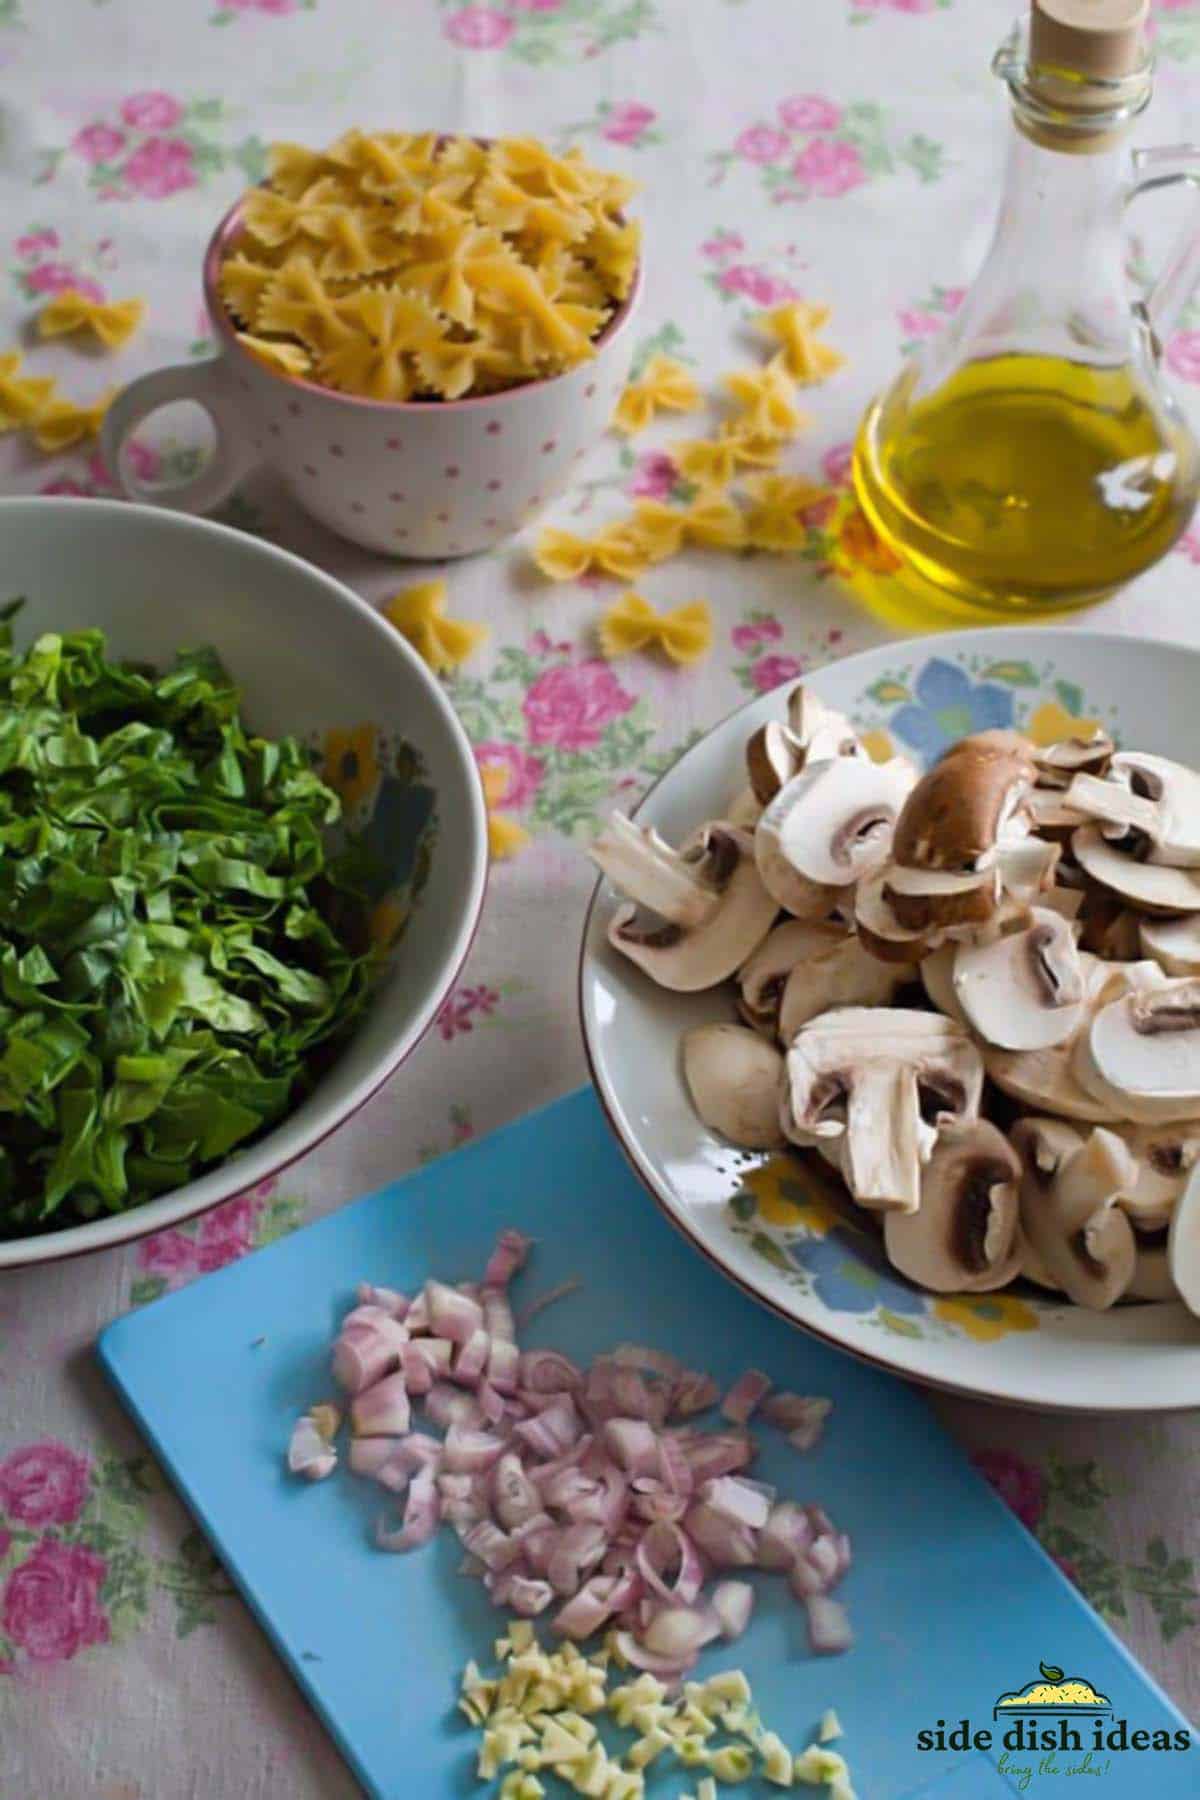 ingredients to make pasta with spinach and mushrooms in bowls